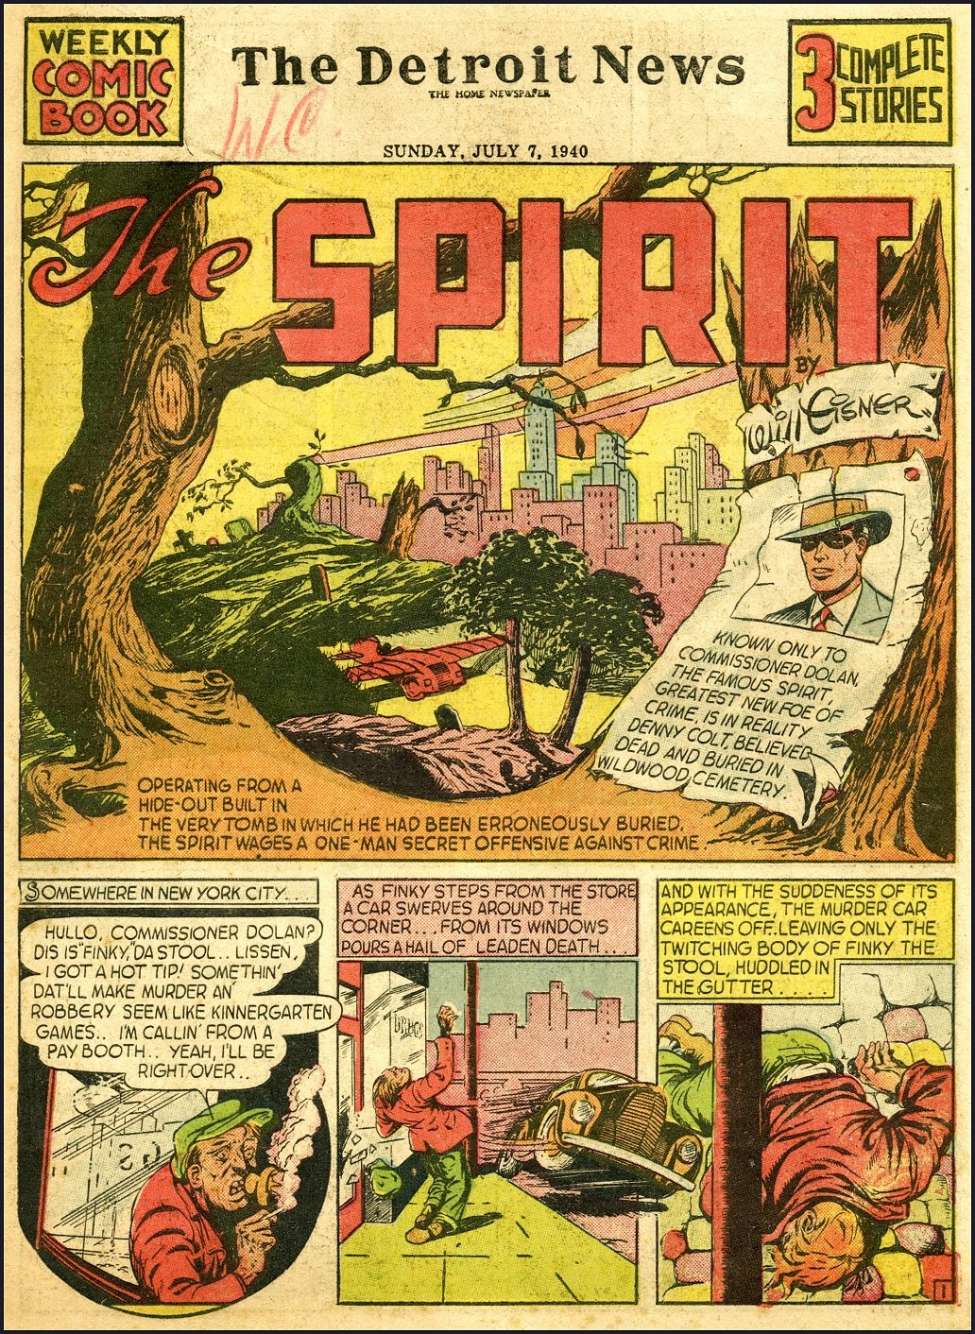 Comic Book Cover For The Spirit (1940-07-07) - Detroit News